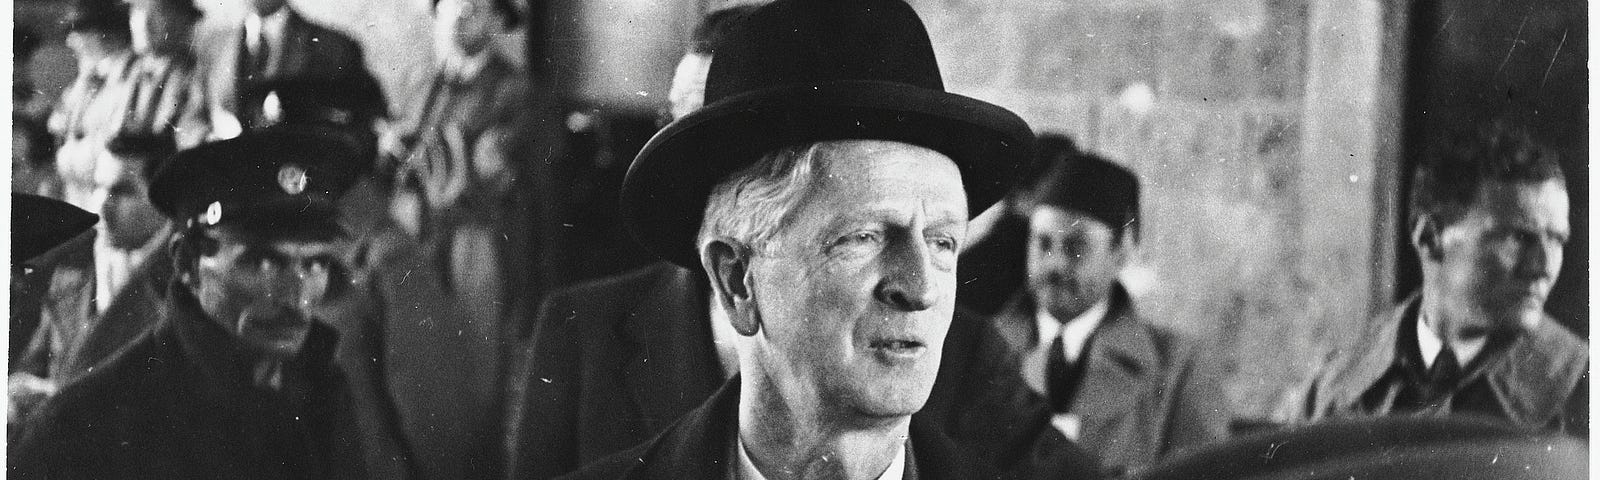 A man wearing an overcoat, vest, tie, and black hat looks off to the side of this black-and-white photograph. There are more men in business formal attire in the background. Over the man’s left shoulder, a man wearing a hat with a badge can be seen looking directly at the camera.